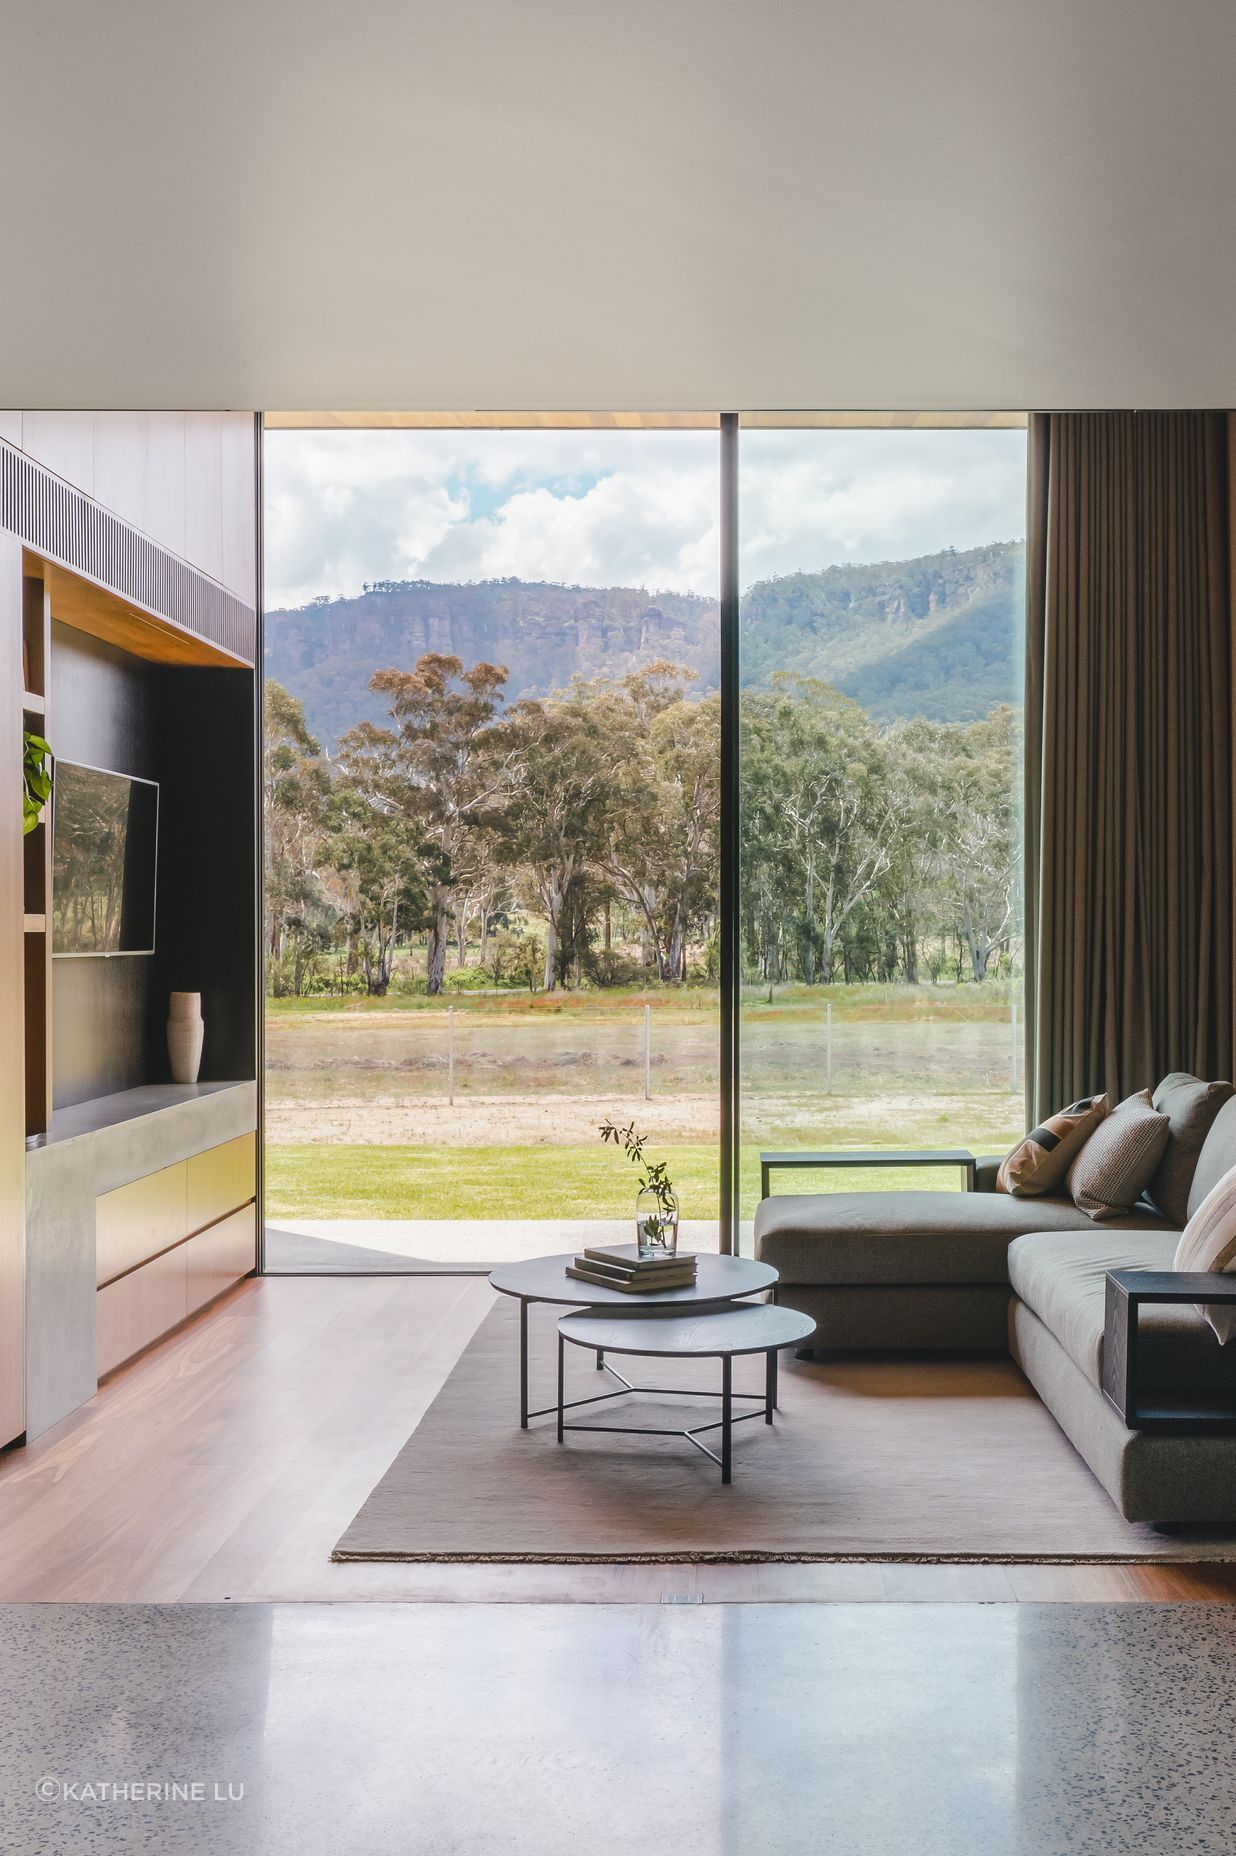 Floor to ceiling glass captures the dense bushland and mountains.